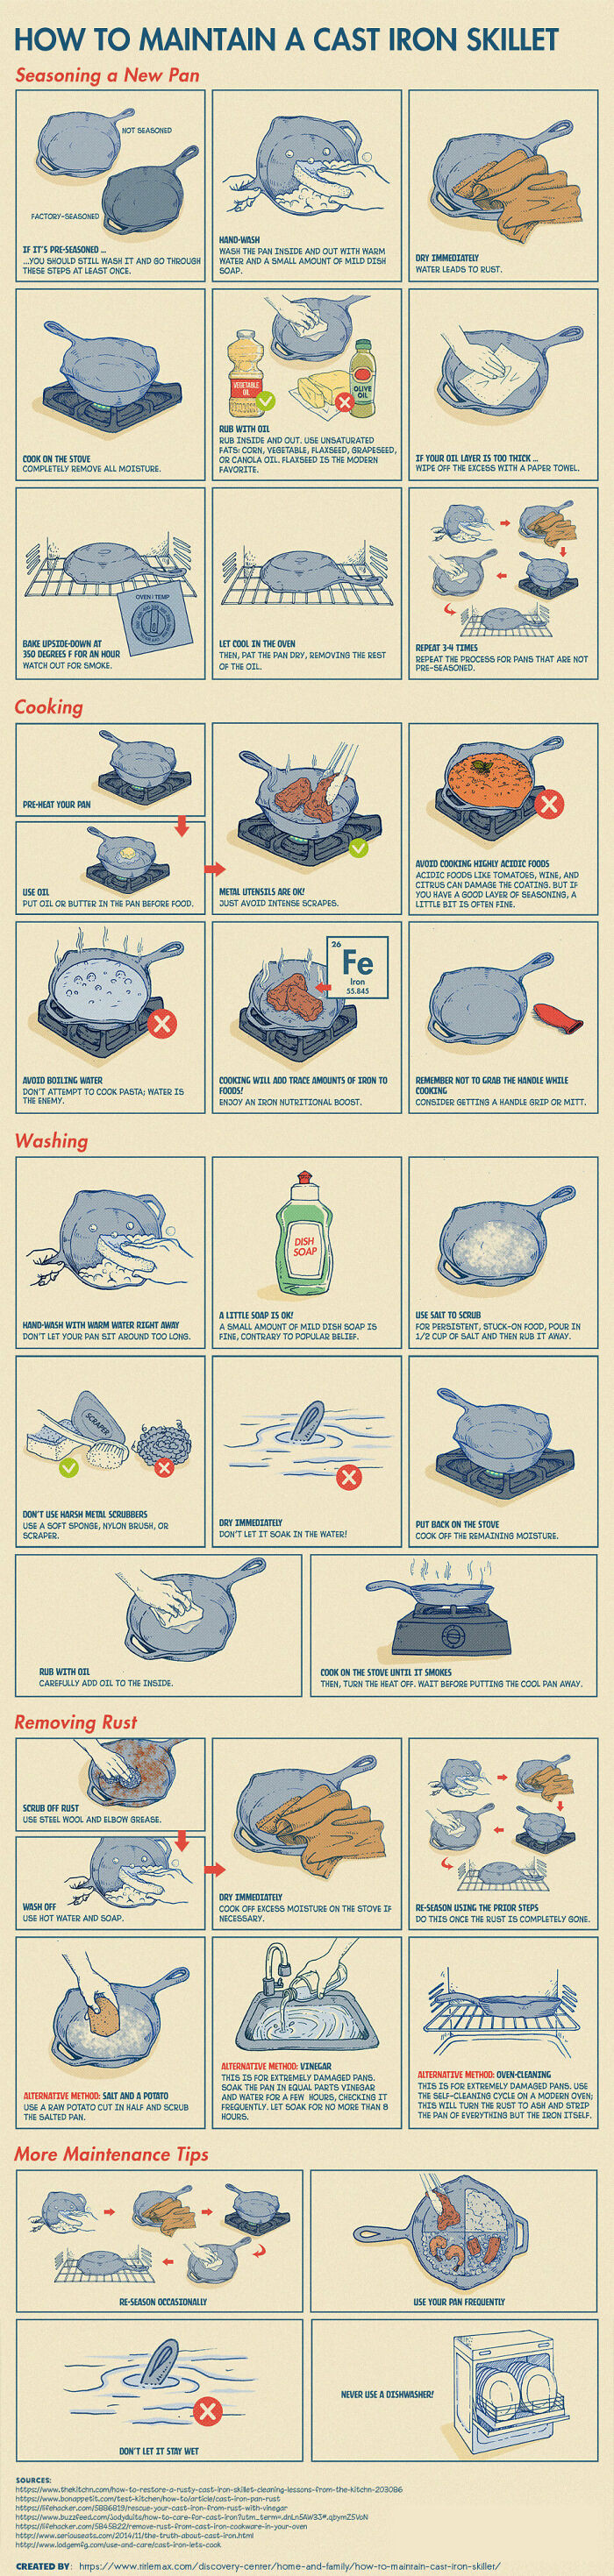 How To Clean, Maintain, And Season A Cast Iron Skillet